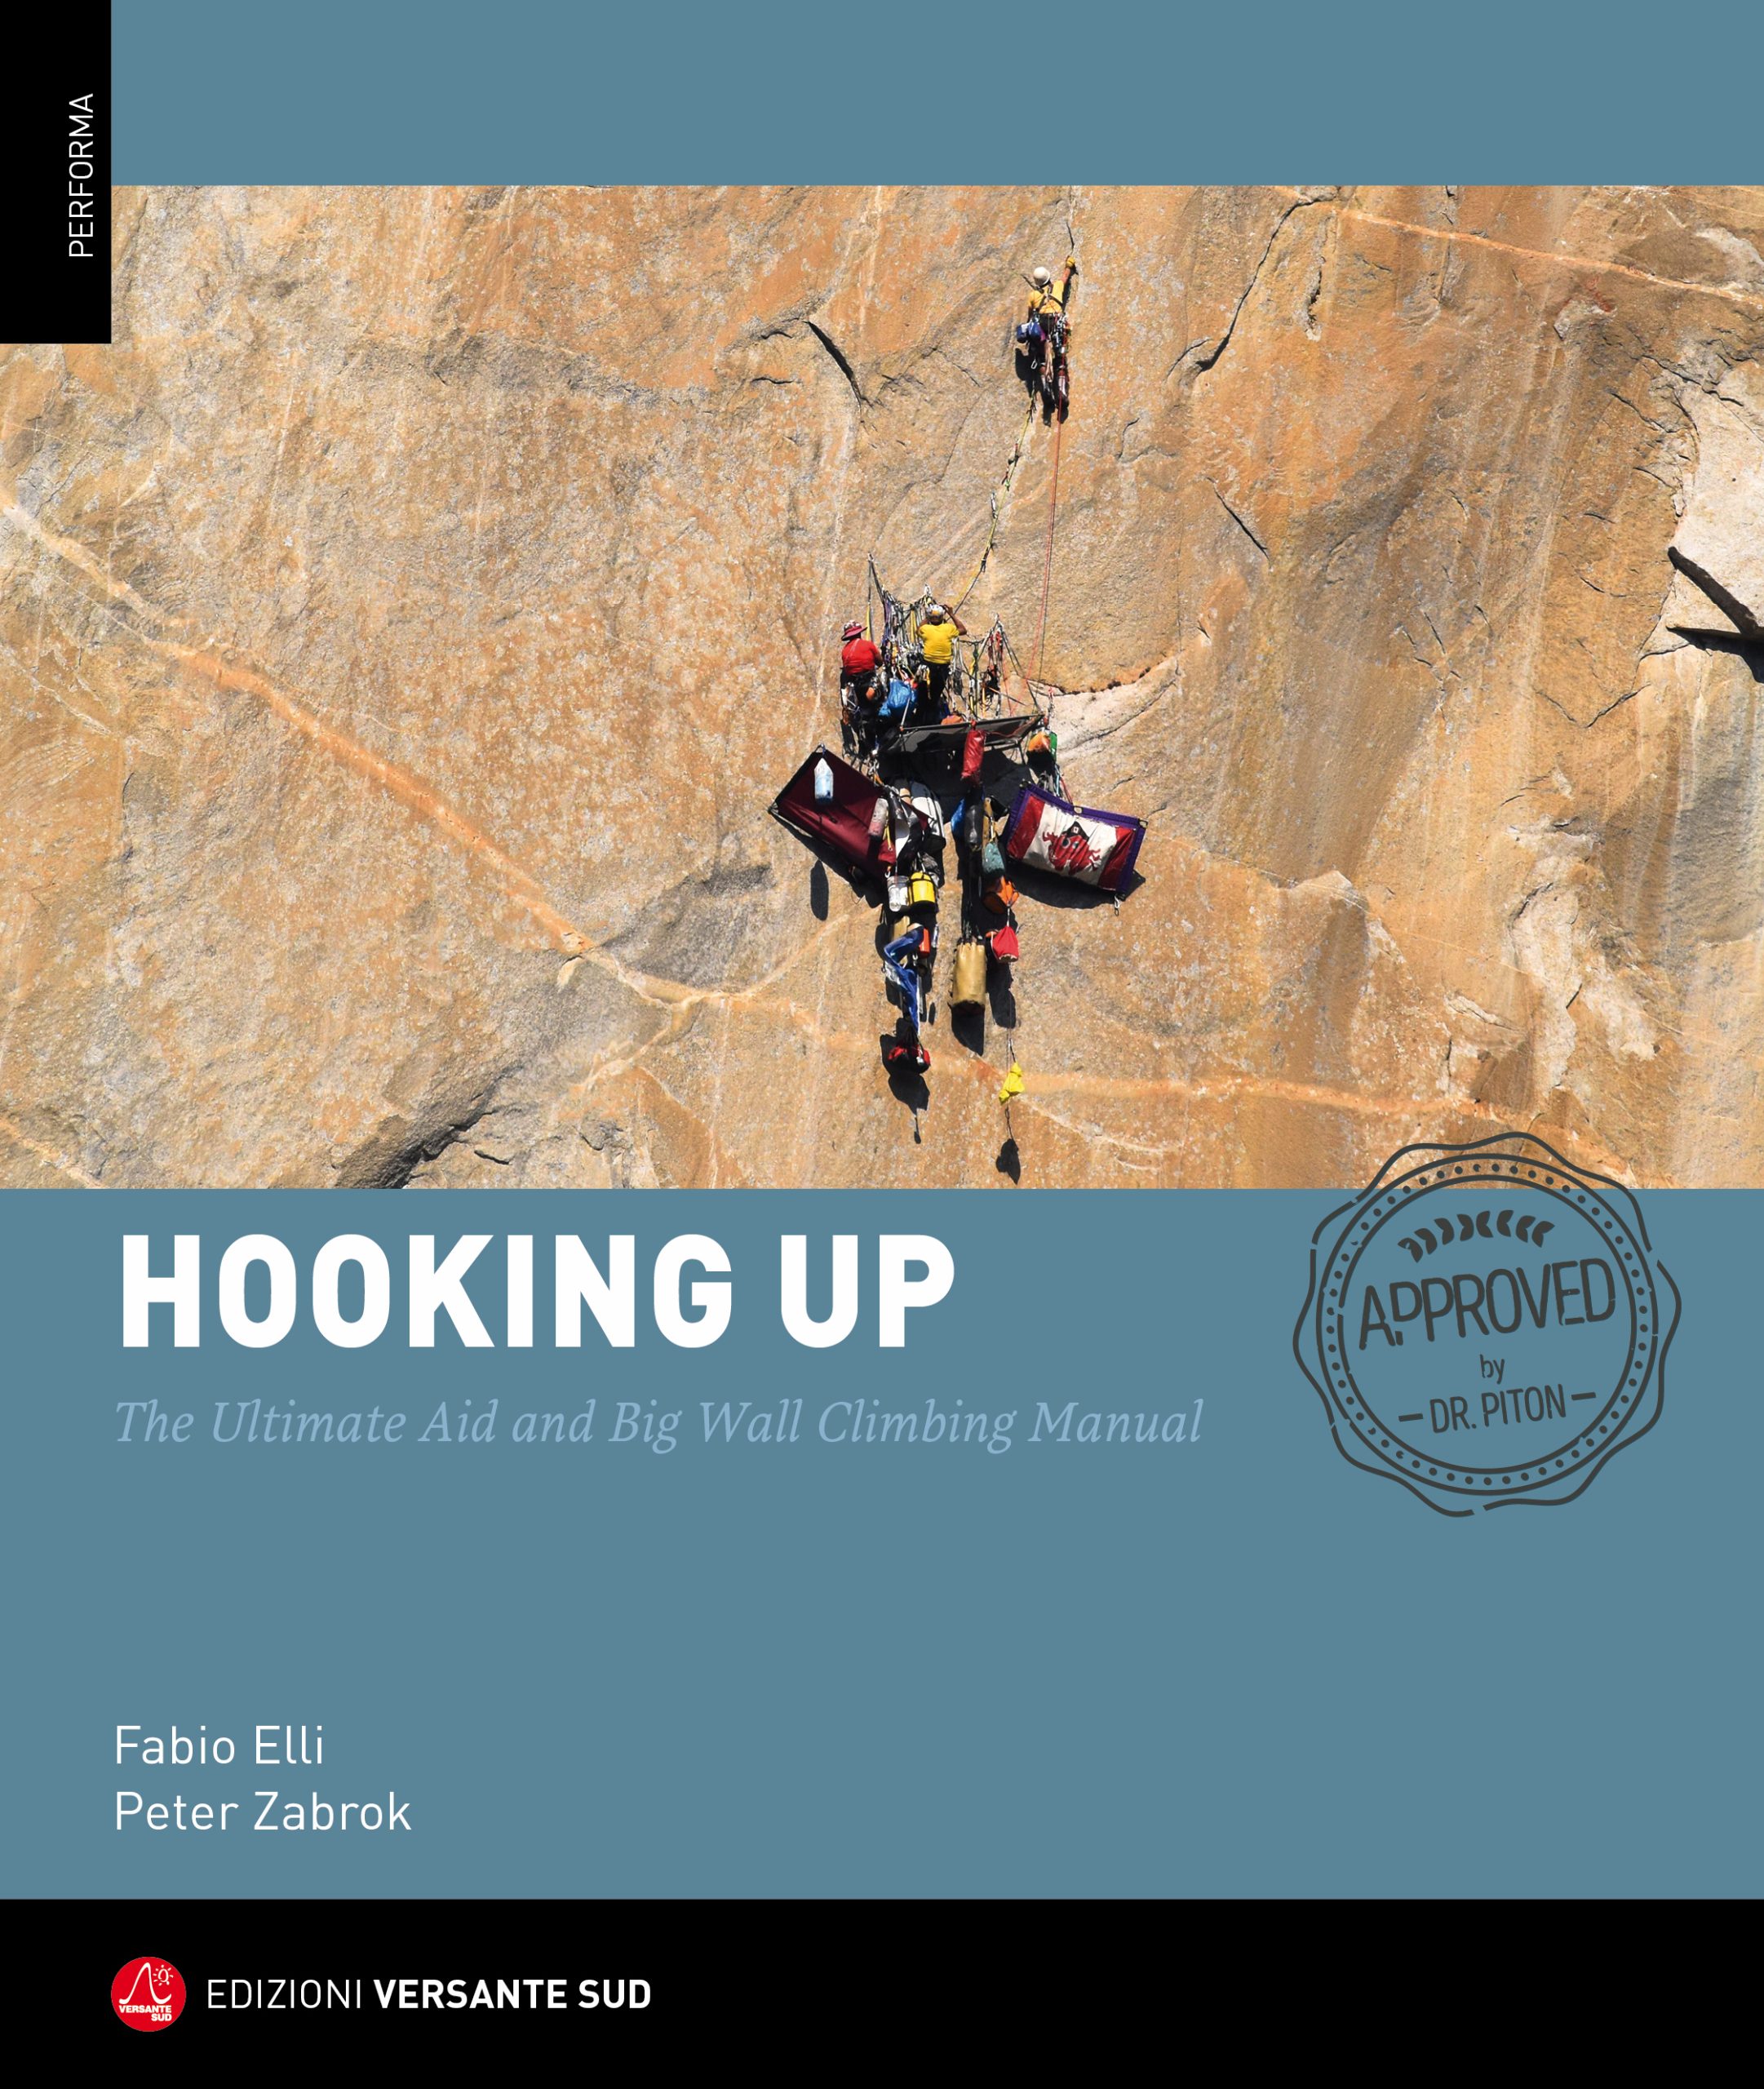 Peter Zabrok and Fabio Elli’s “Hooking Up” big wall aid climbing manual is fun as well as informative